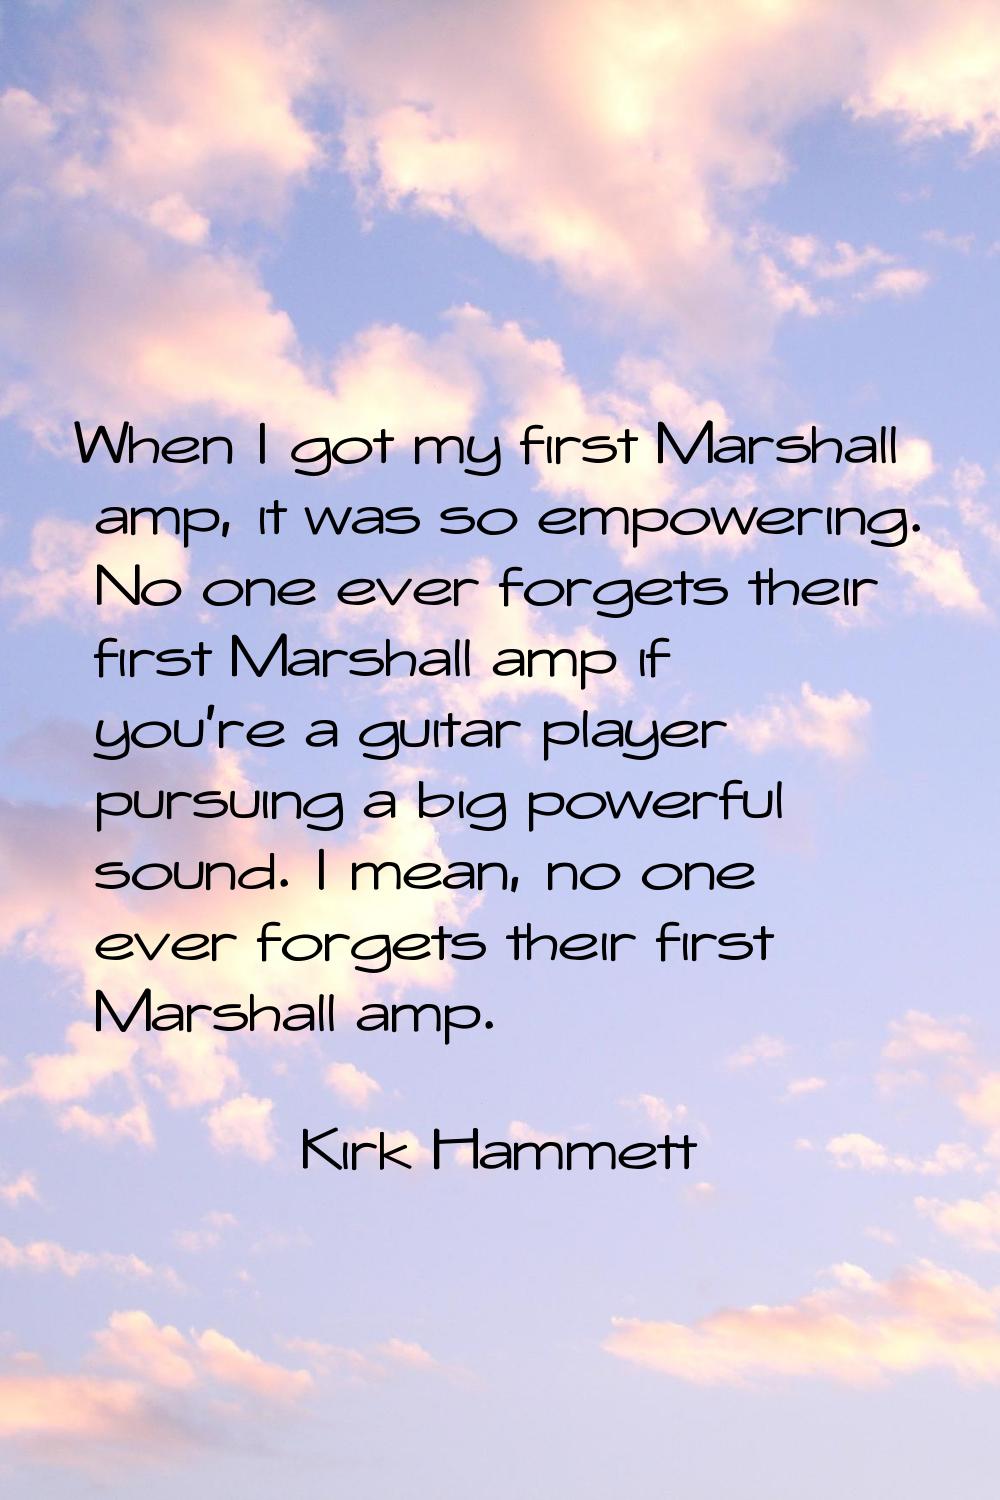 When I got my first Marshall amp, it was so empowering. No one ever forgets their first Marshall am